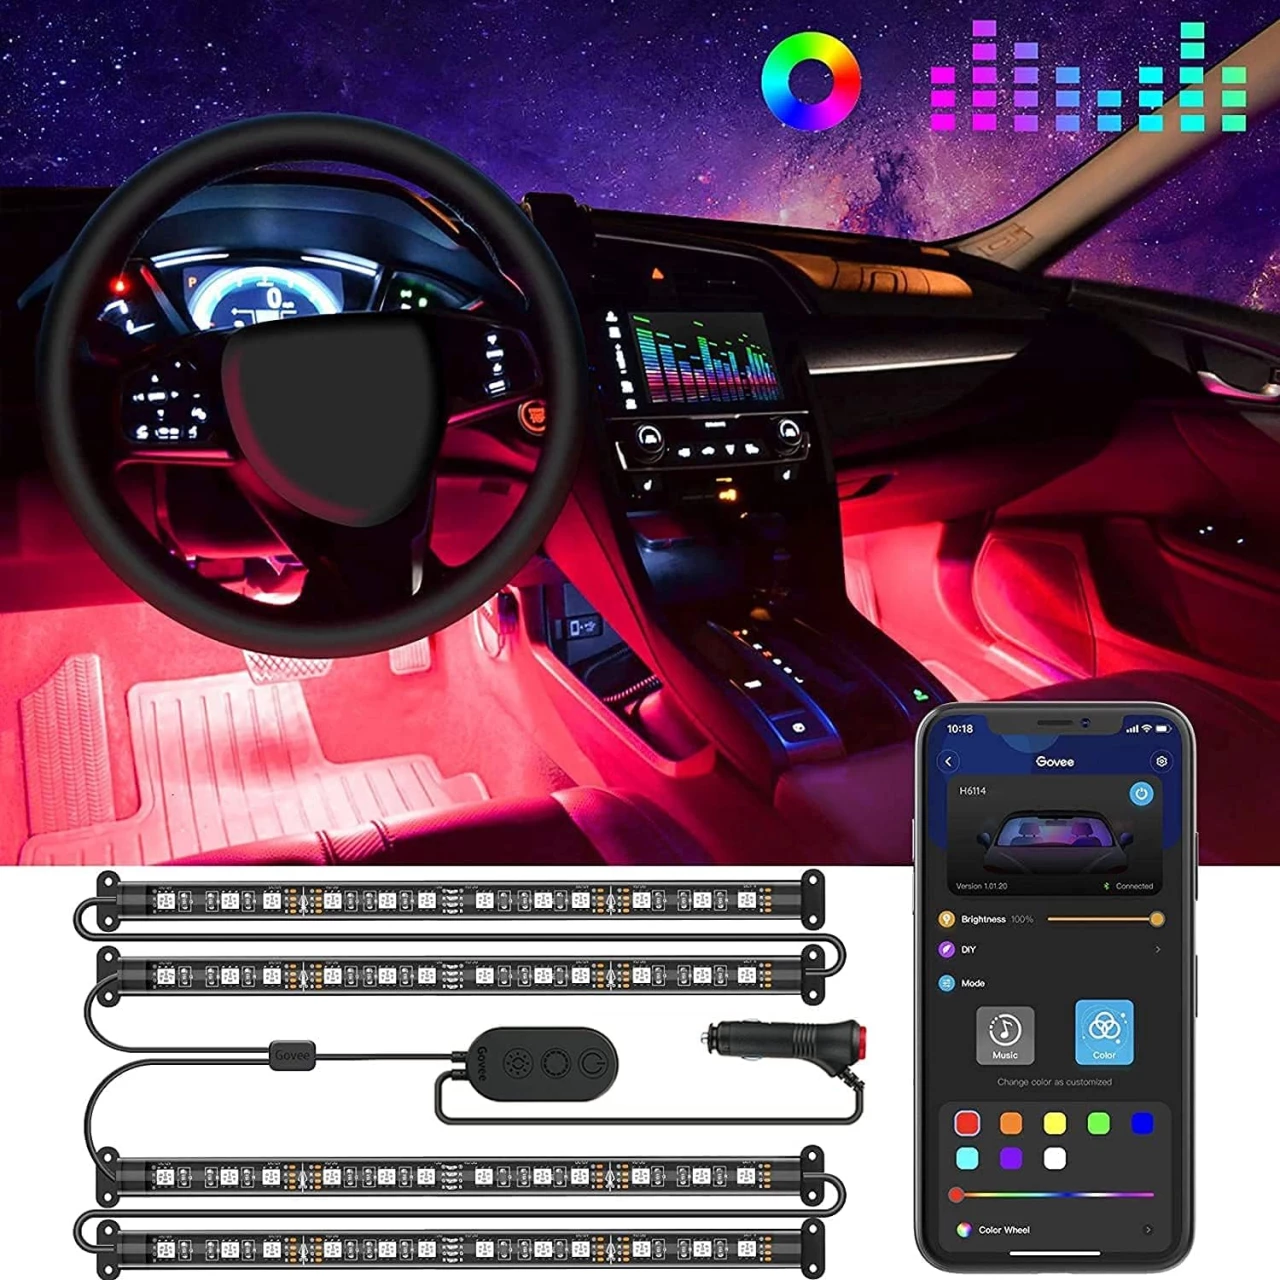 Govee Car LED Lights, Smart Car Interior Lights with App Control, RGB Inside Car Lights with DIY Mode and Music Mode, 2 Lines Design LED Lights for Cars with Car Charger, DC 12V